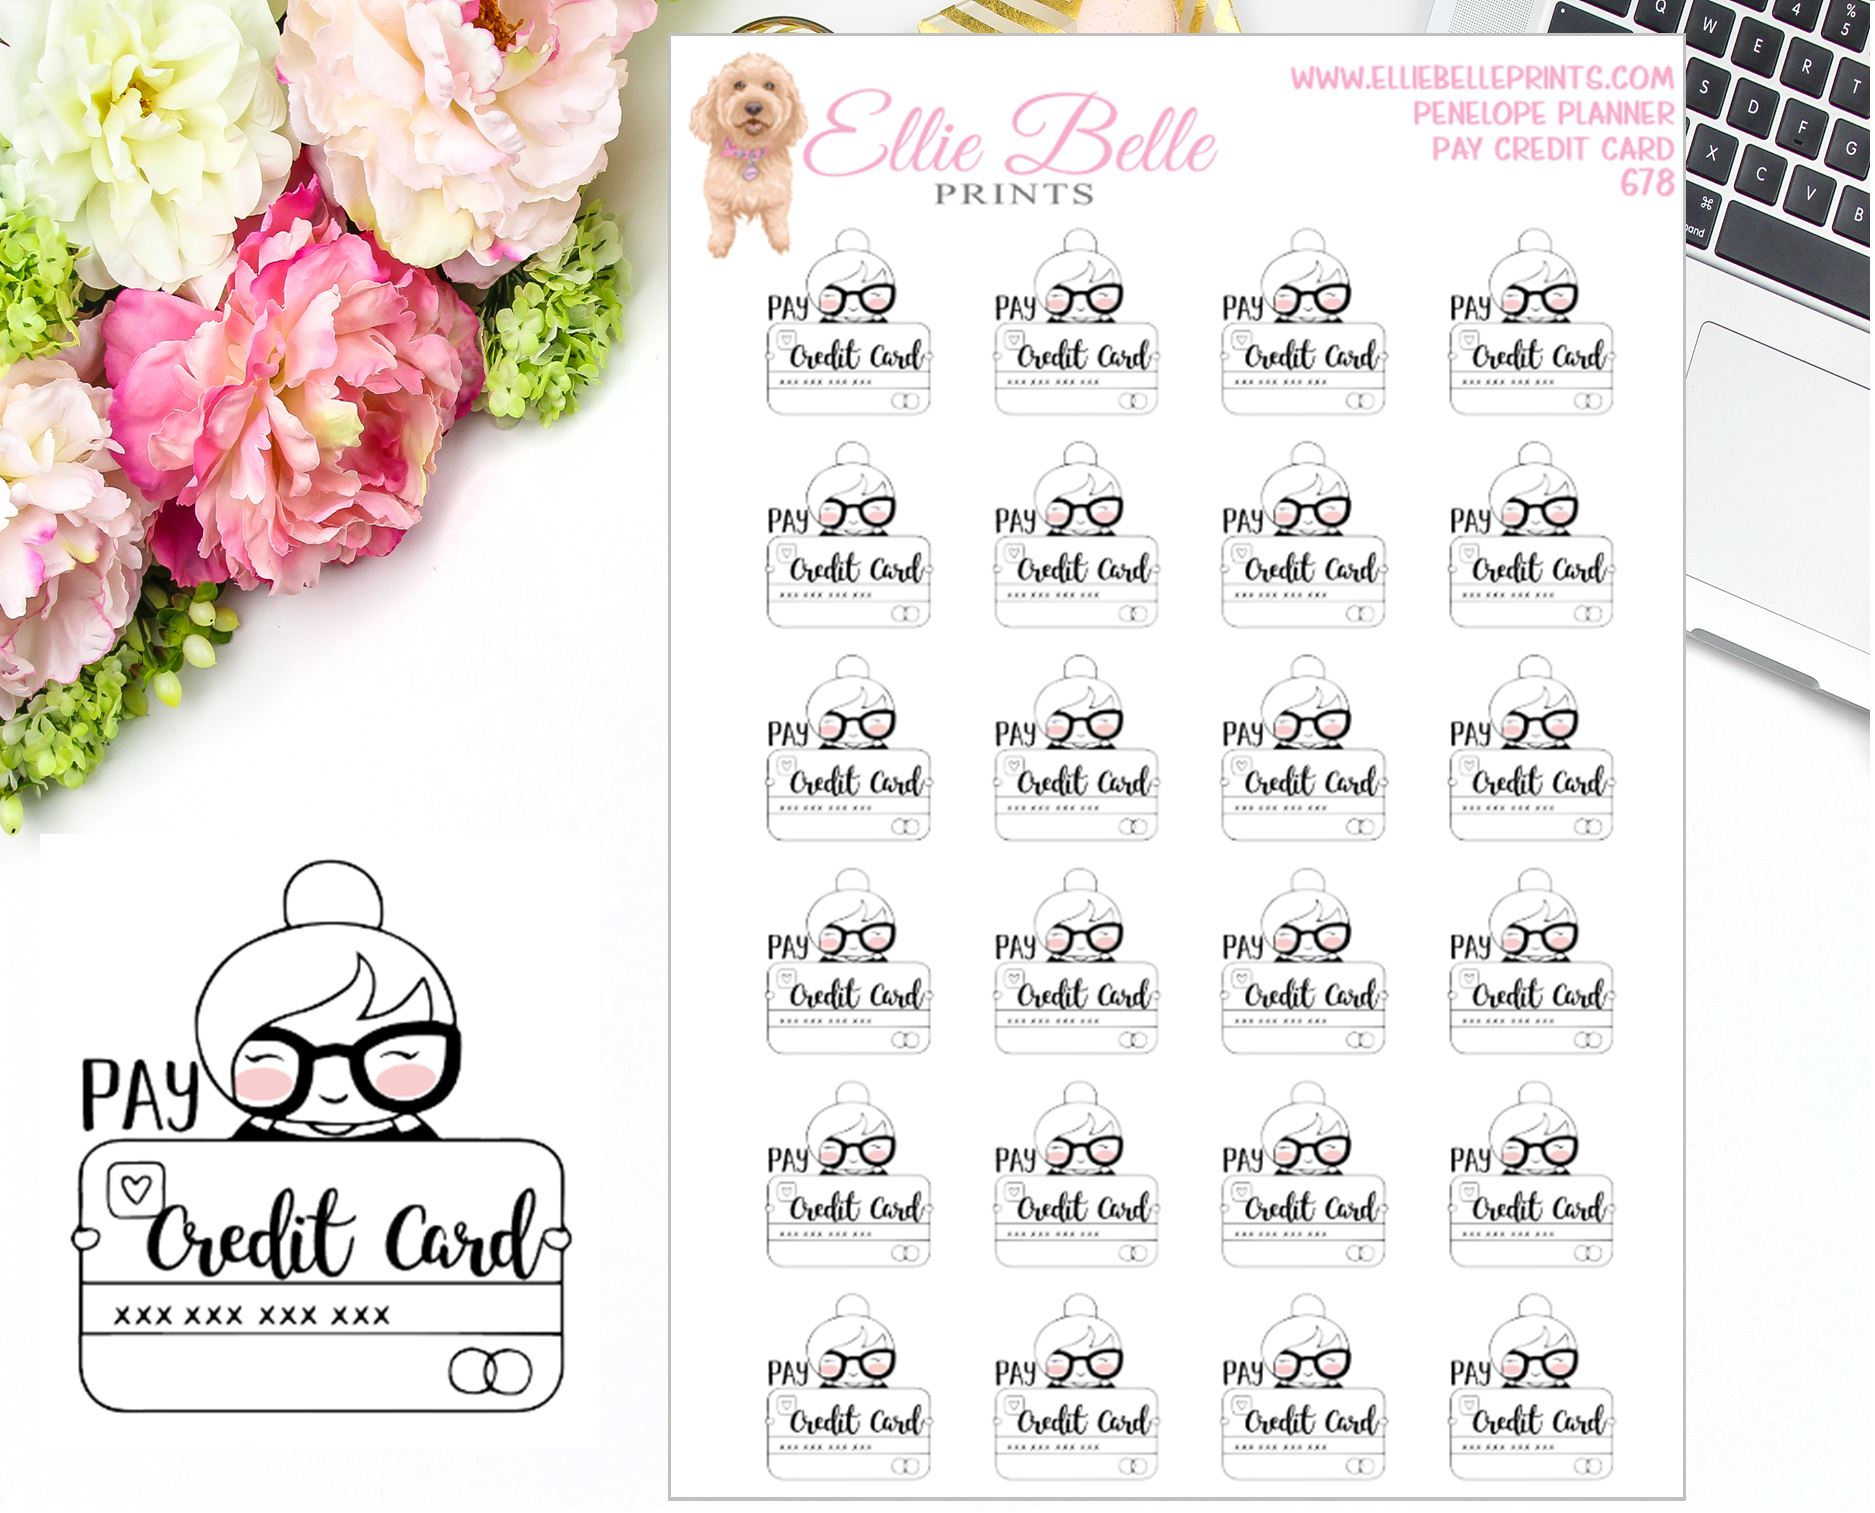 Pay Credit Card Bill Stickers - Penelope Planner